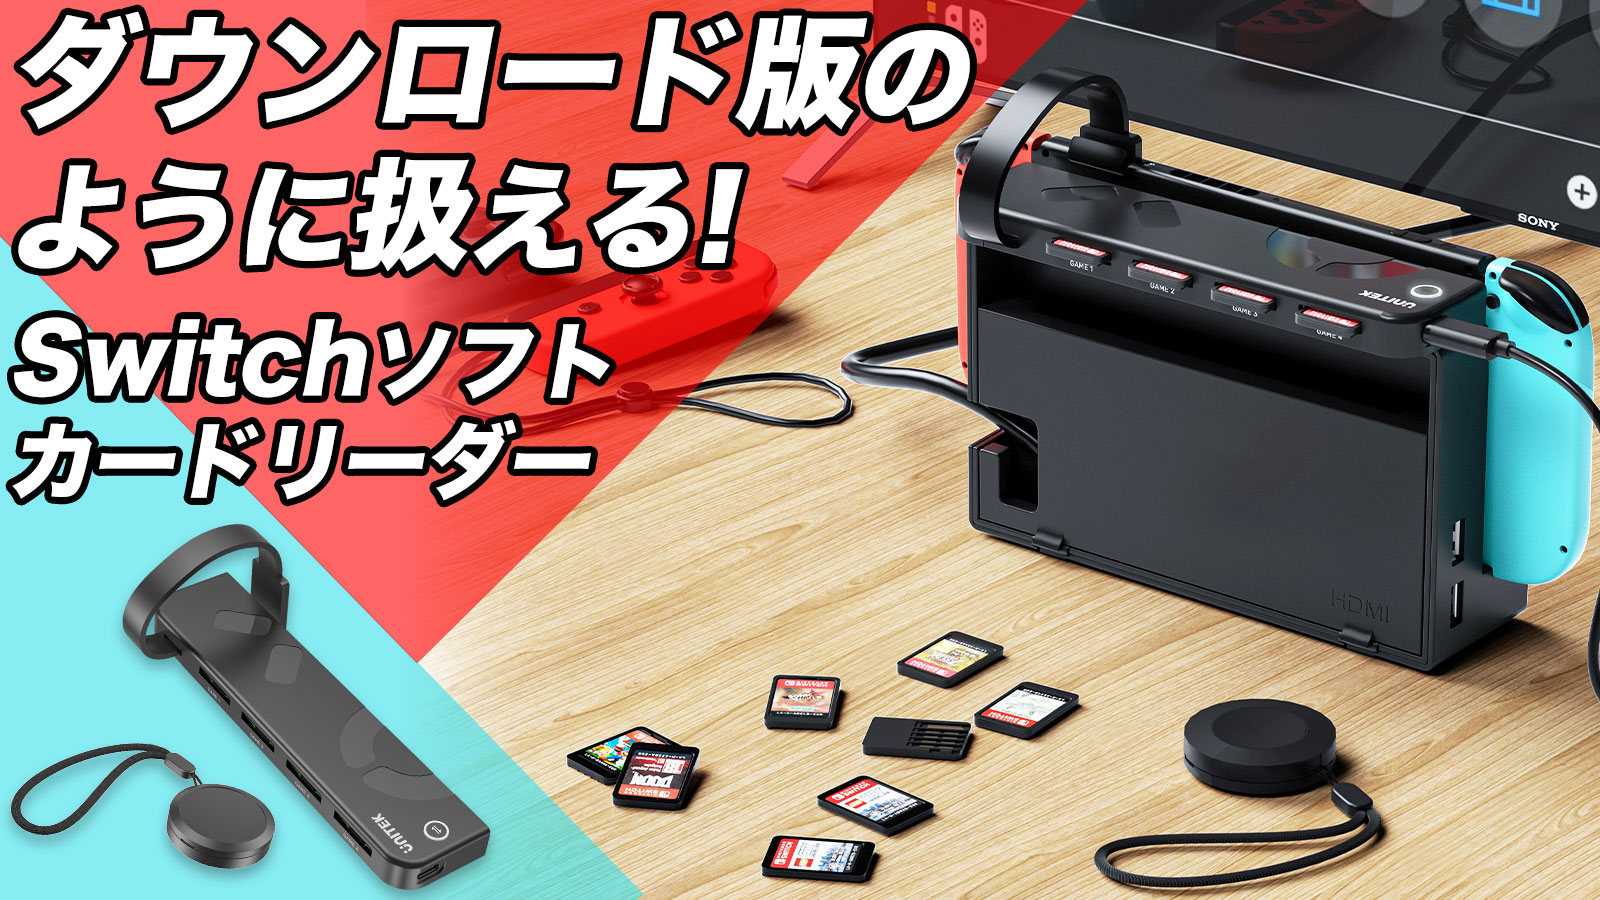 The “Nintendo Switch Game Software Switch Card Reader” is so popular that over 750 people spent over 5 million yen in 3 days after its release on Makuake!  Easily switch between up to 4 games using the buttons or remote!  The design is great too!  ｜MEETS TRADING press release